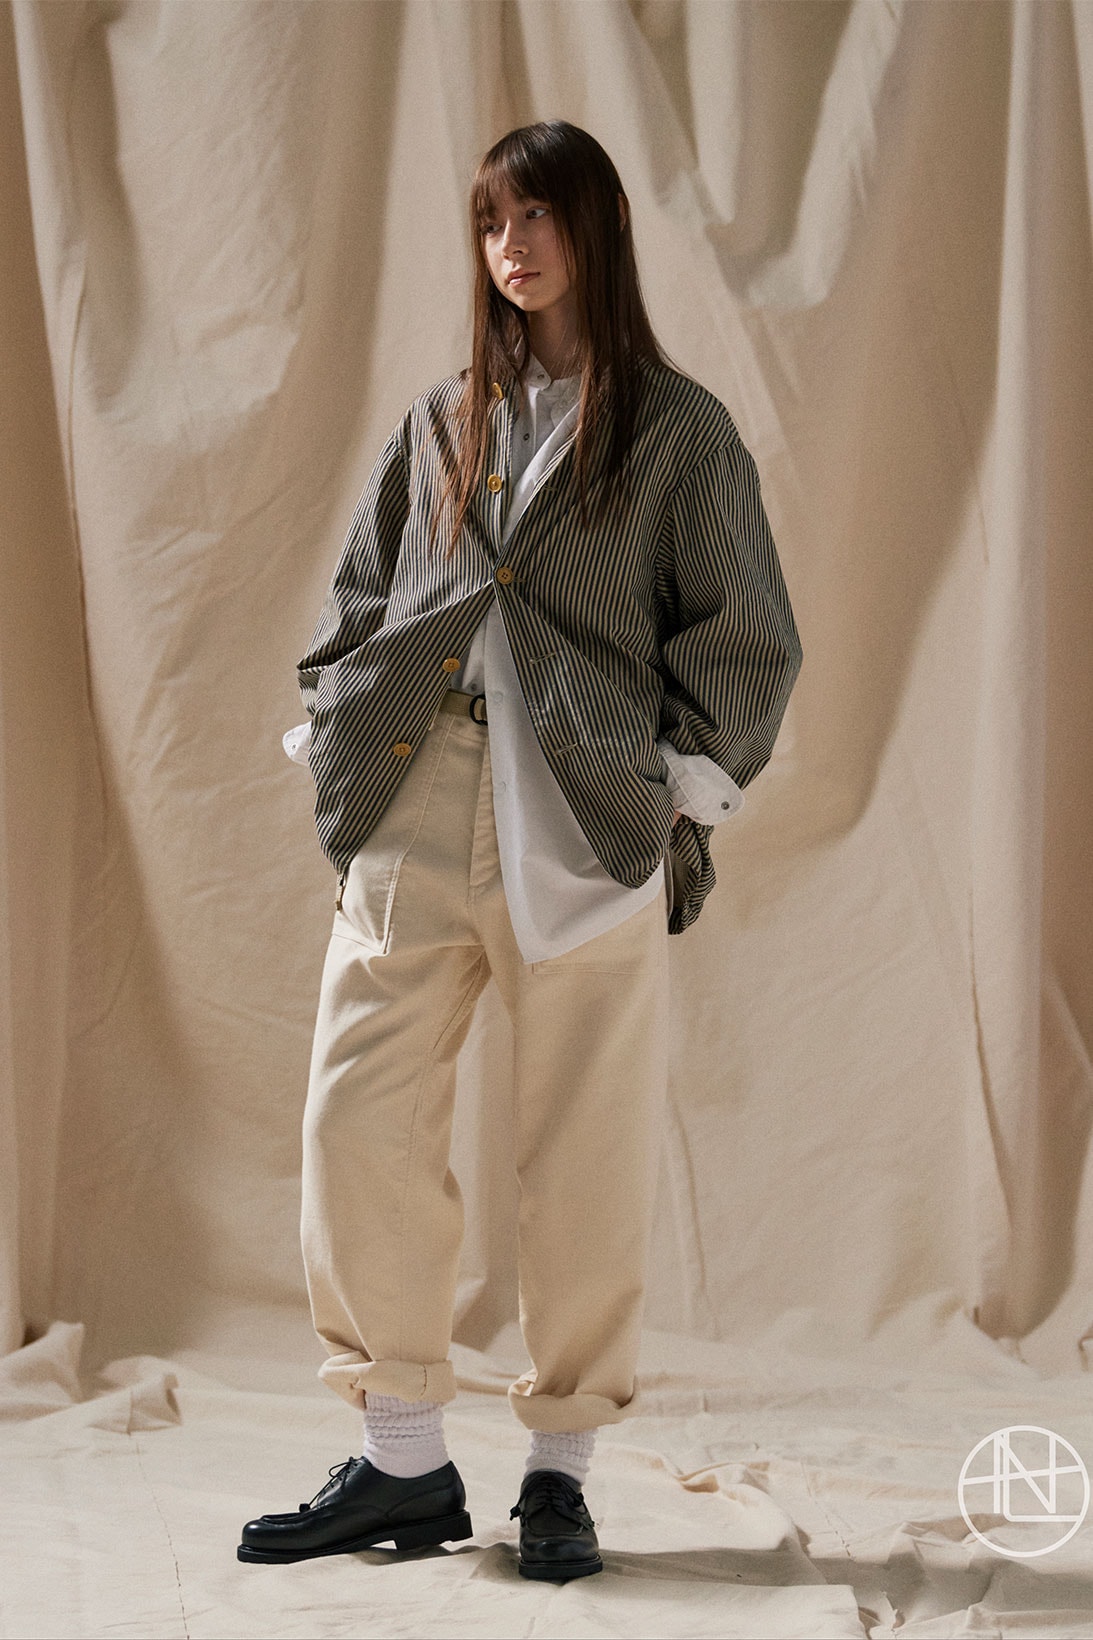 nanamica Spring Summer Collection "One Ocean, All Lands" Womenswear Lookbook Release